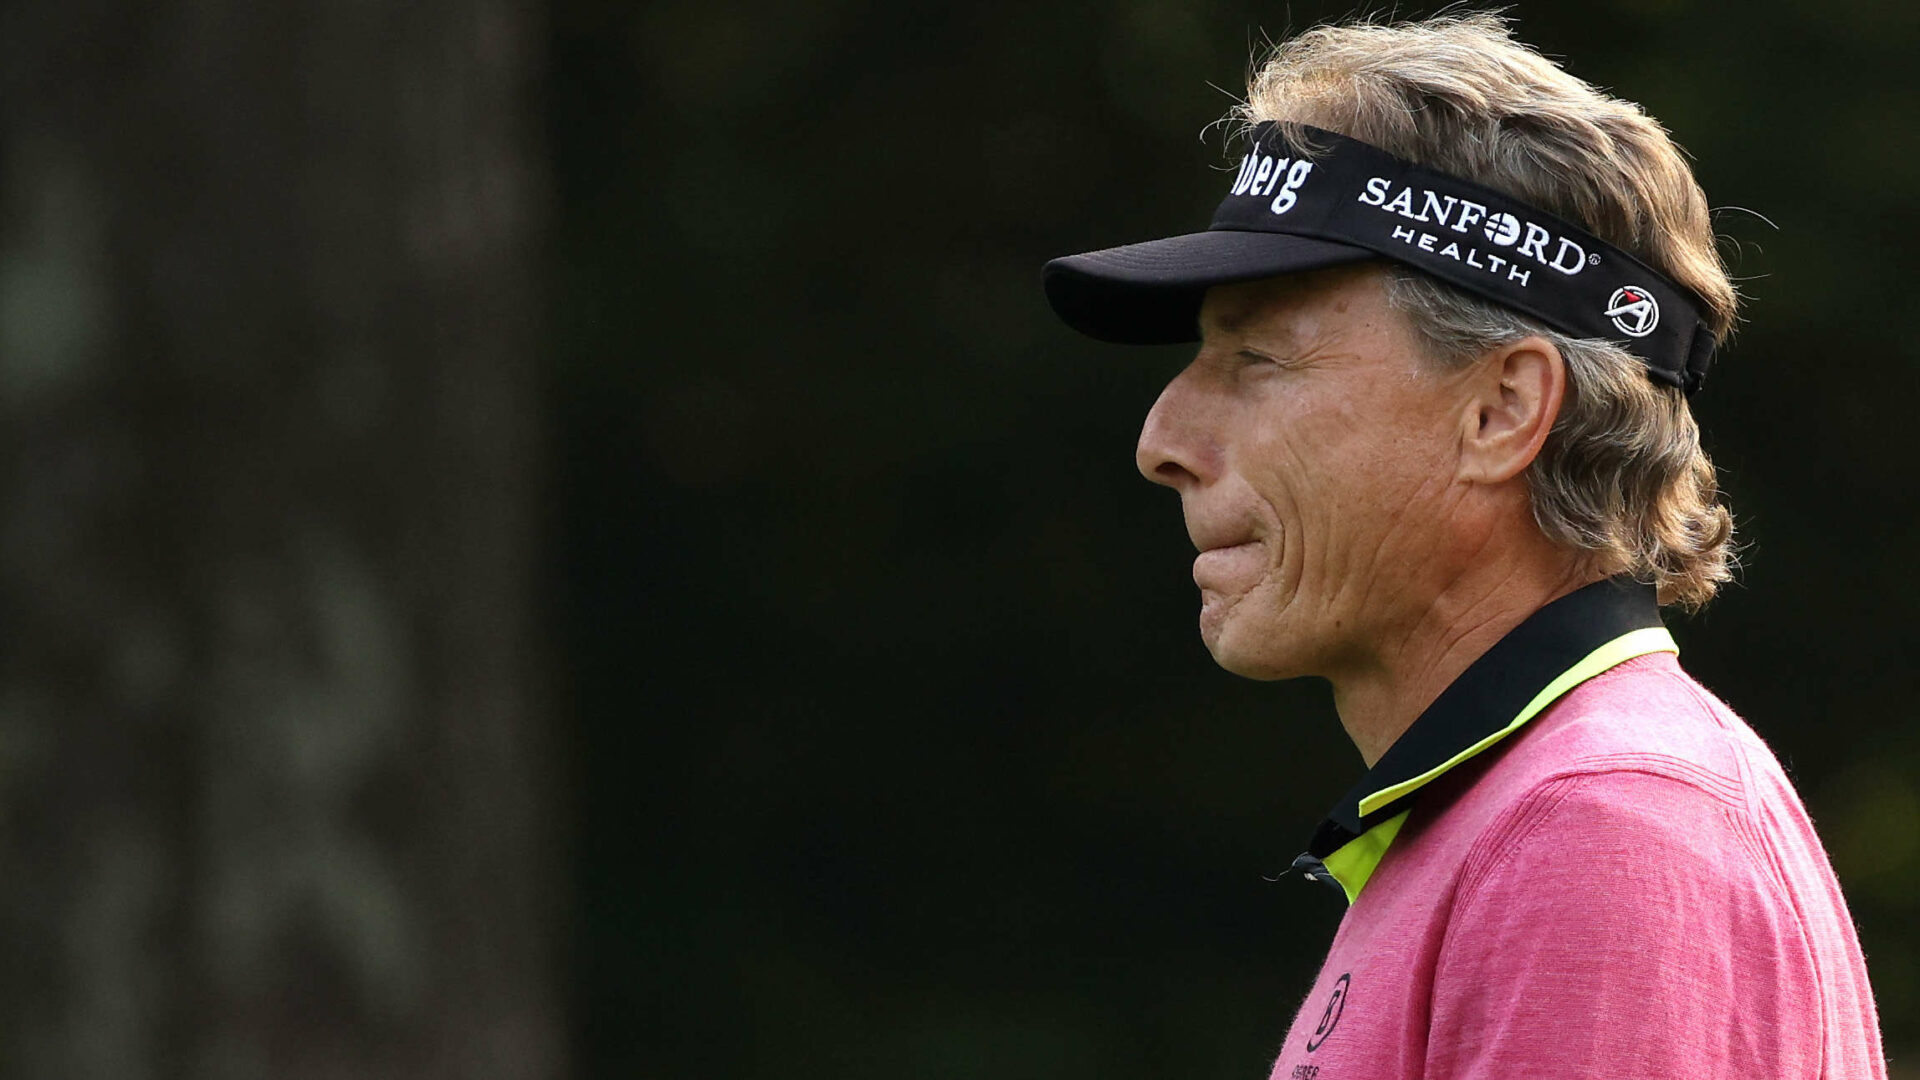 AUGUSTA, GEORGIA - APRIL 08: Bernhard Langer of Germany walks up the first fairway during the first round of the Masters at Augusta National Golf Club on April 08, 2021 in Augusta, Georgia. (Photo by Kevin C. Cox/Getty Images)